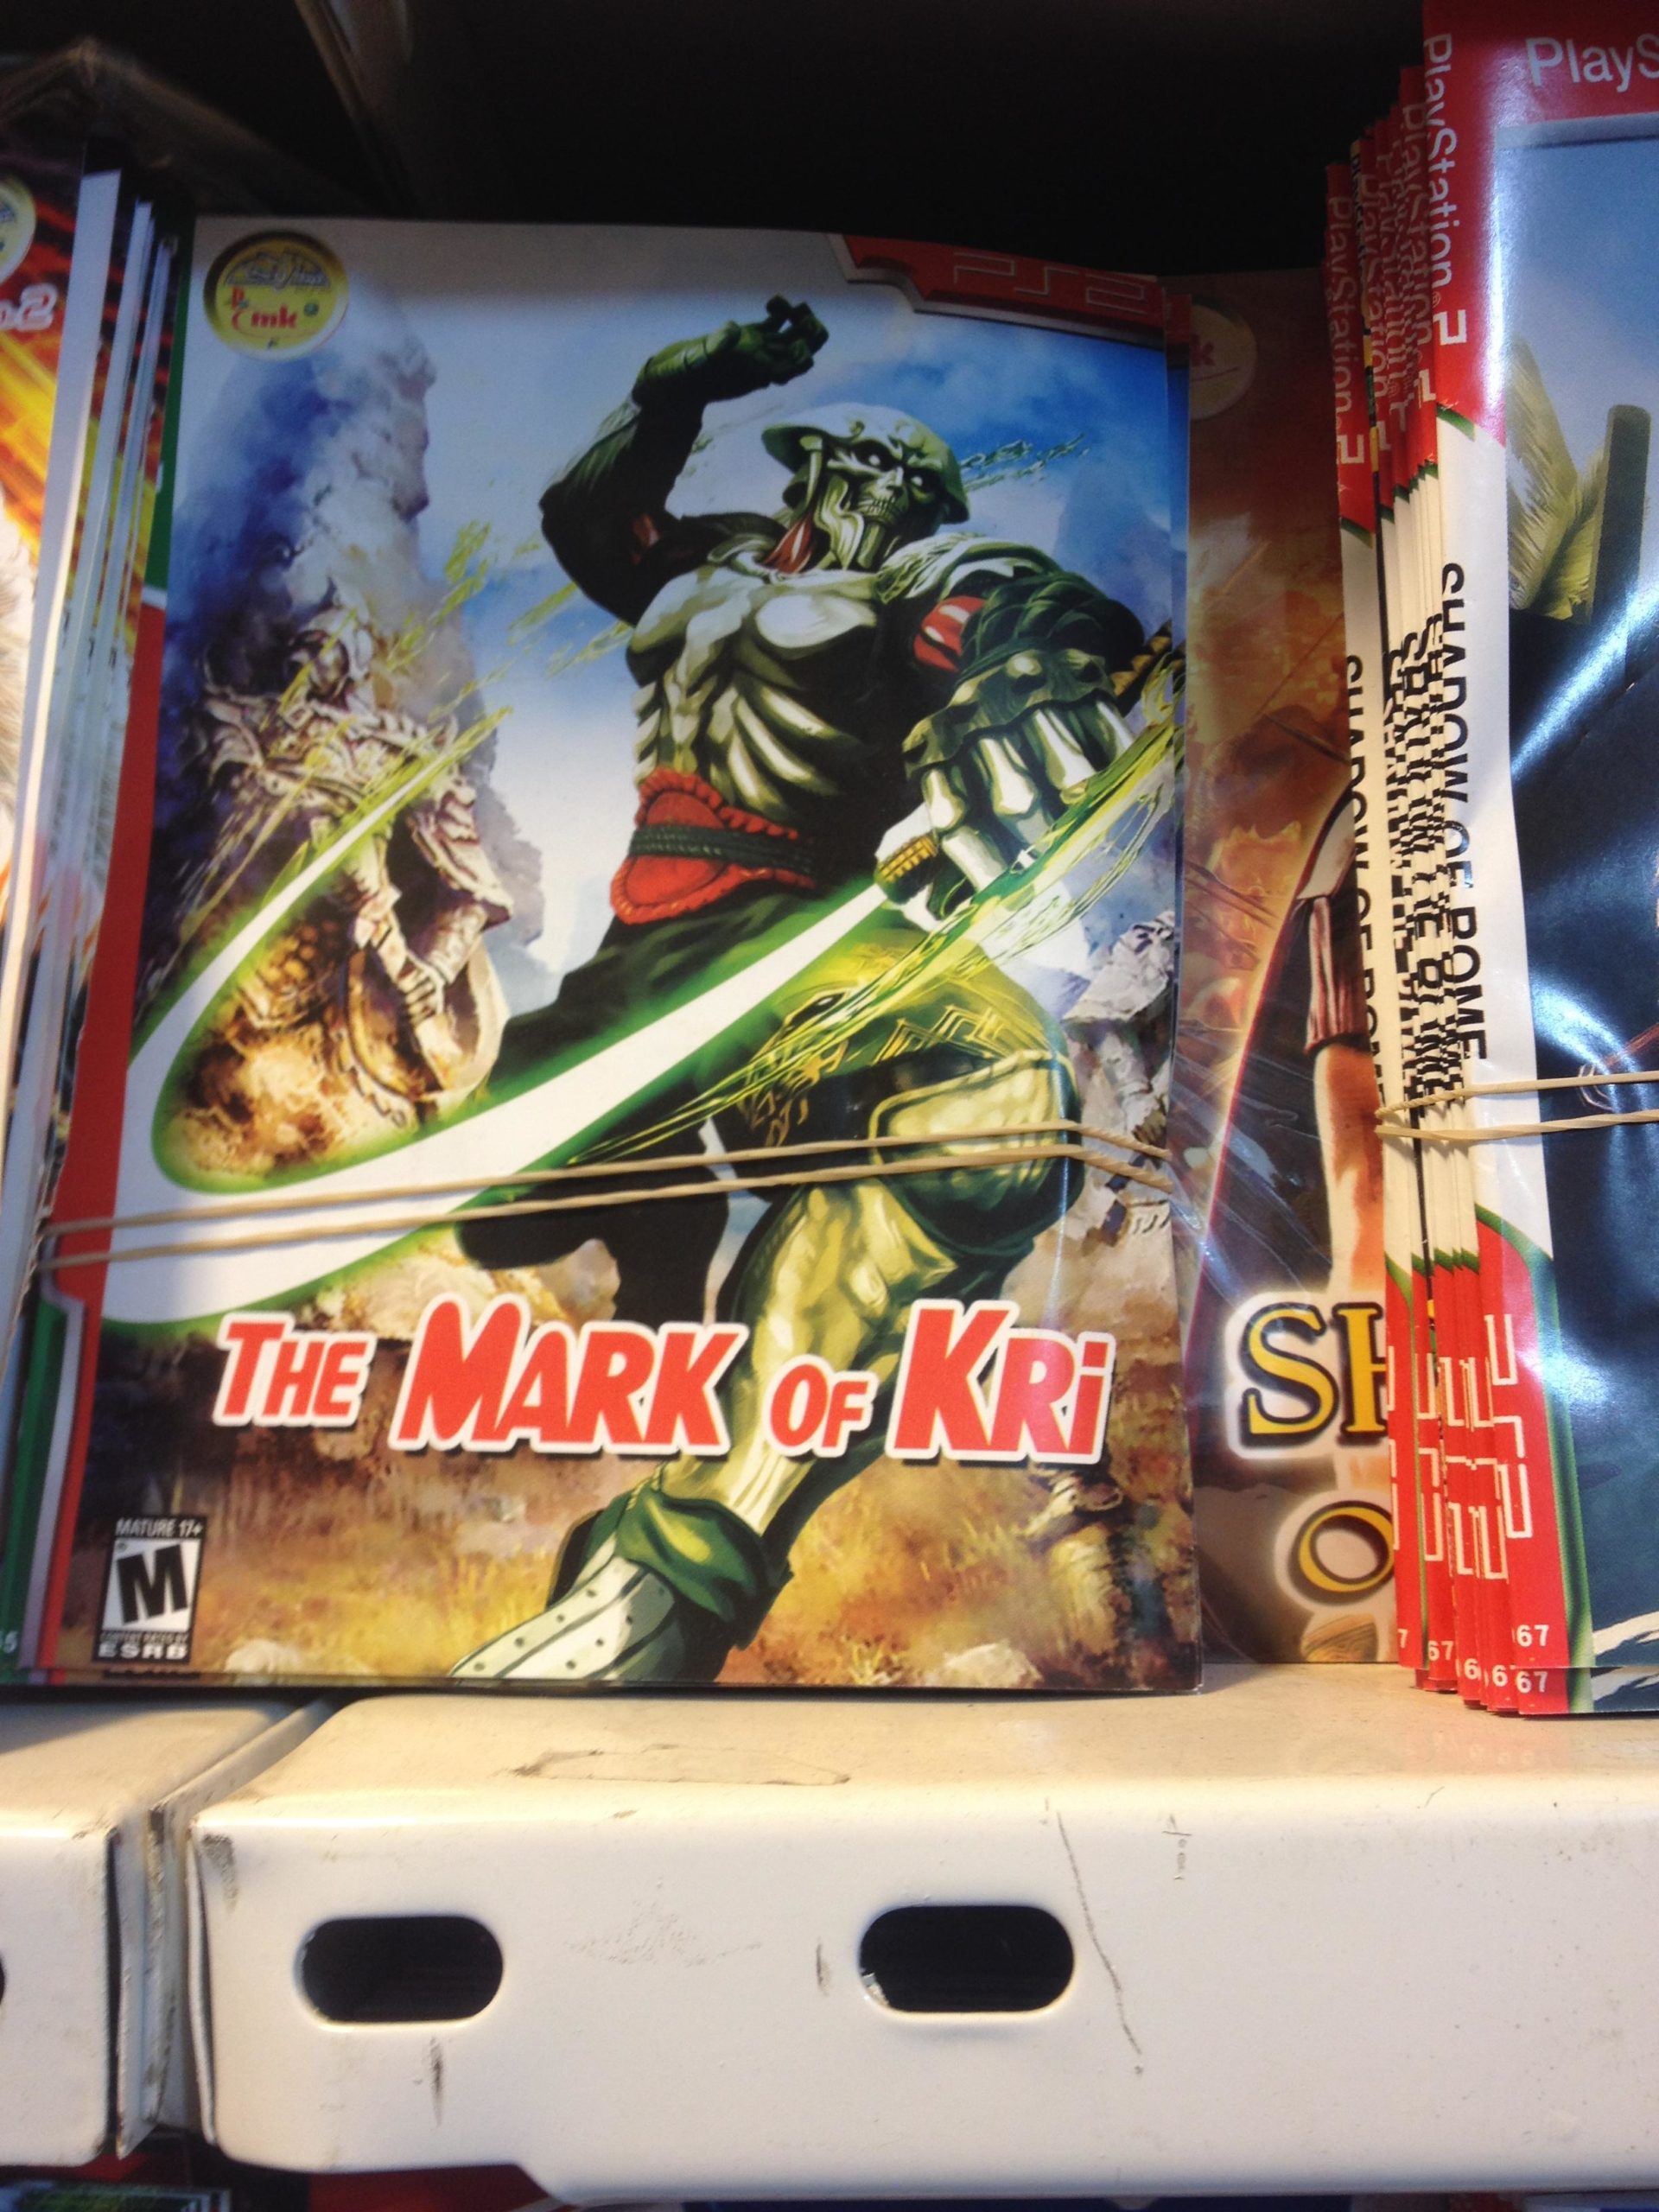 Iraqi Bootleg Game Covers Are The Best Kind Of Ridiculous